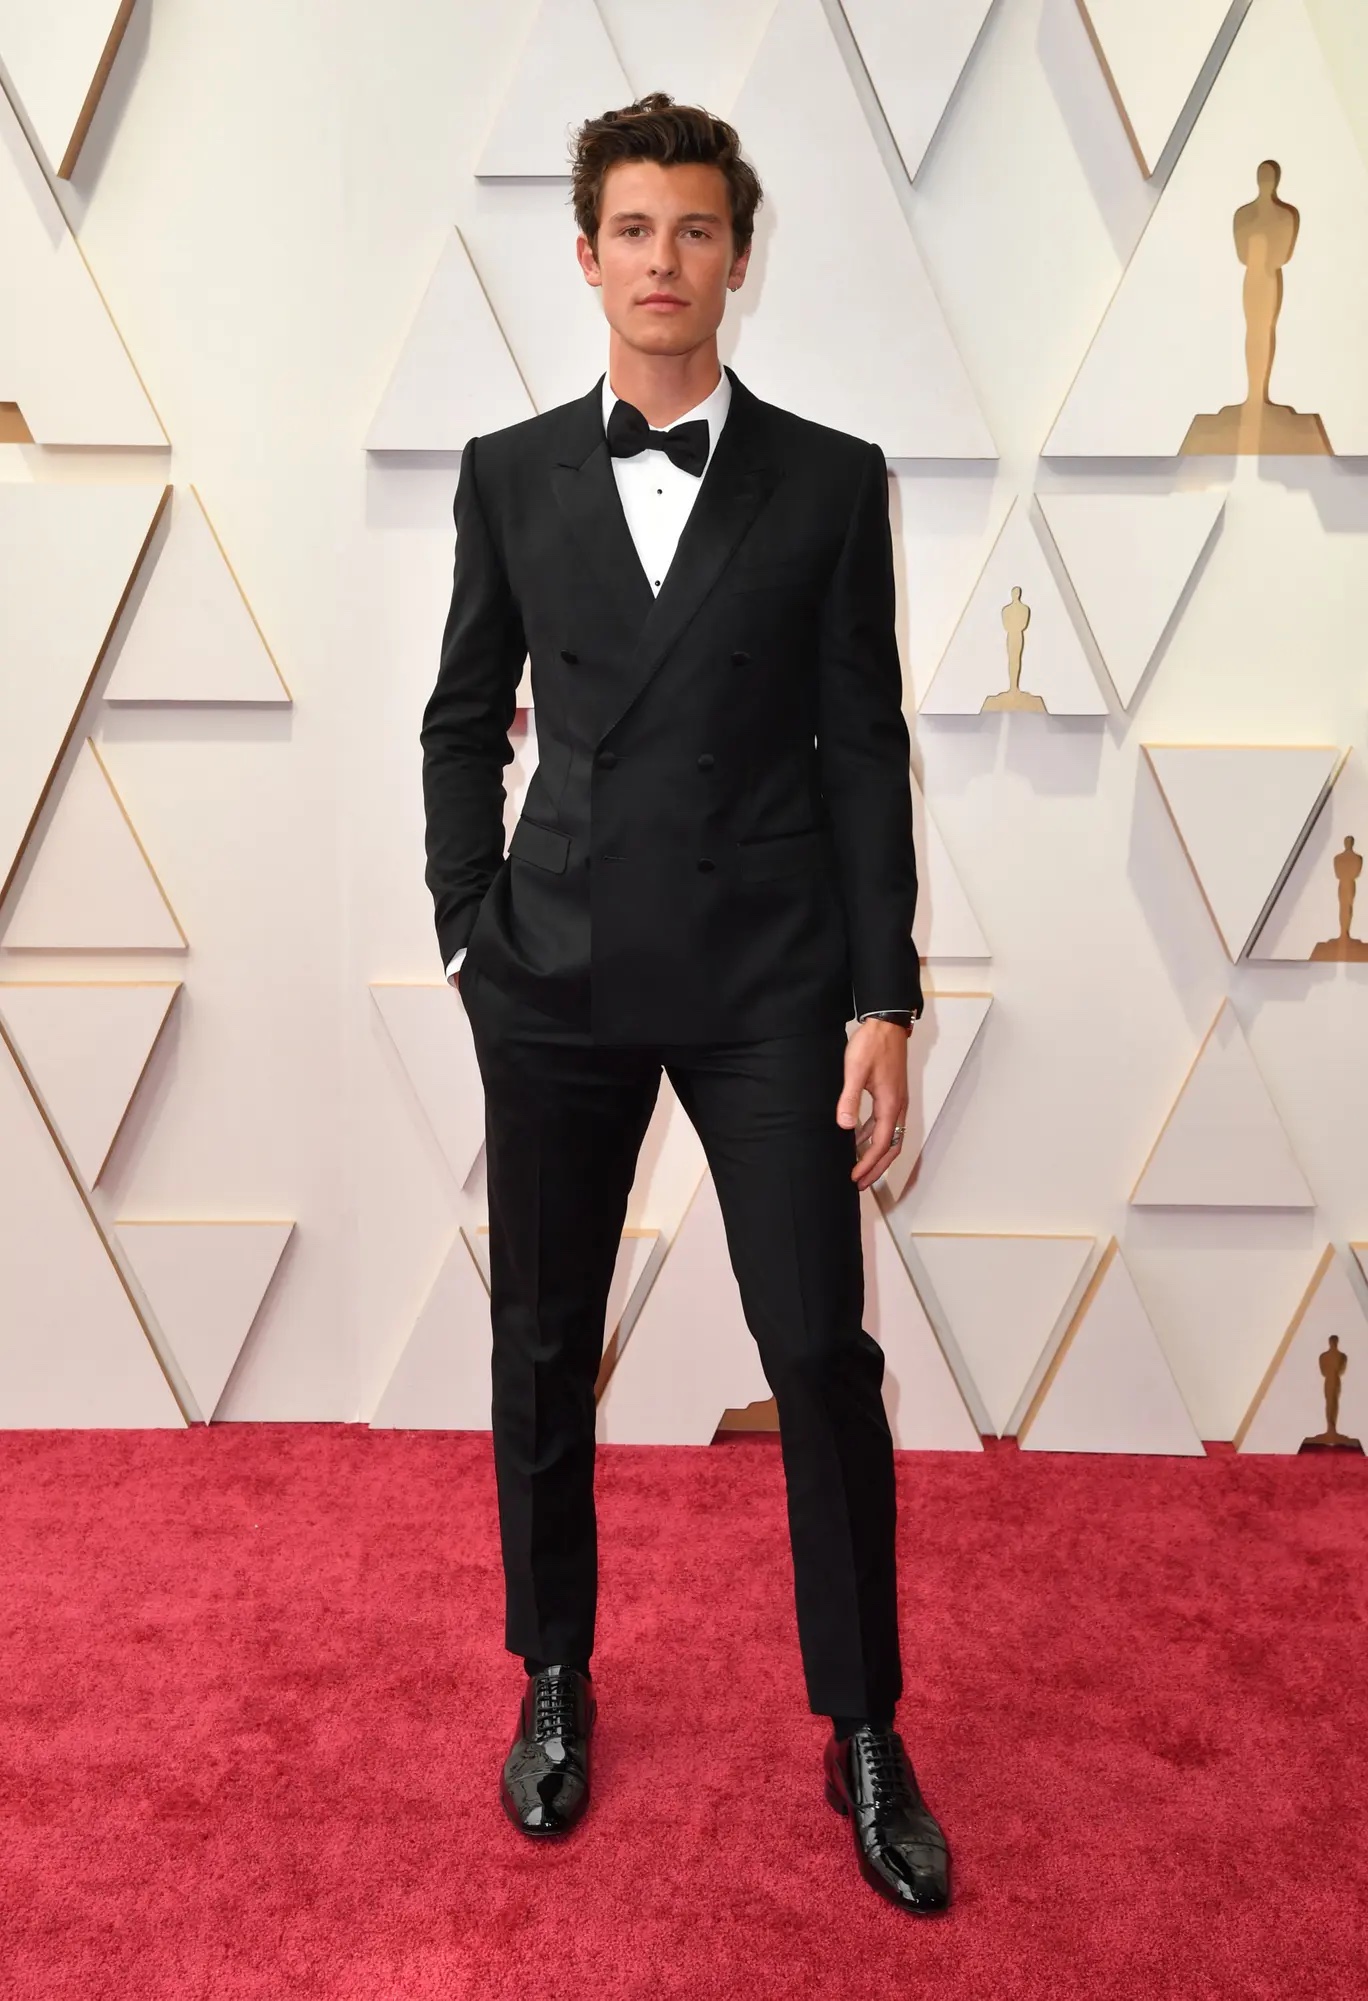 Best Dressed Men at the Oscars 2022 - A&E Magazine